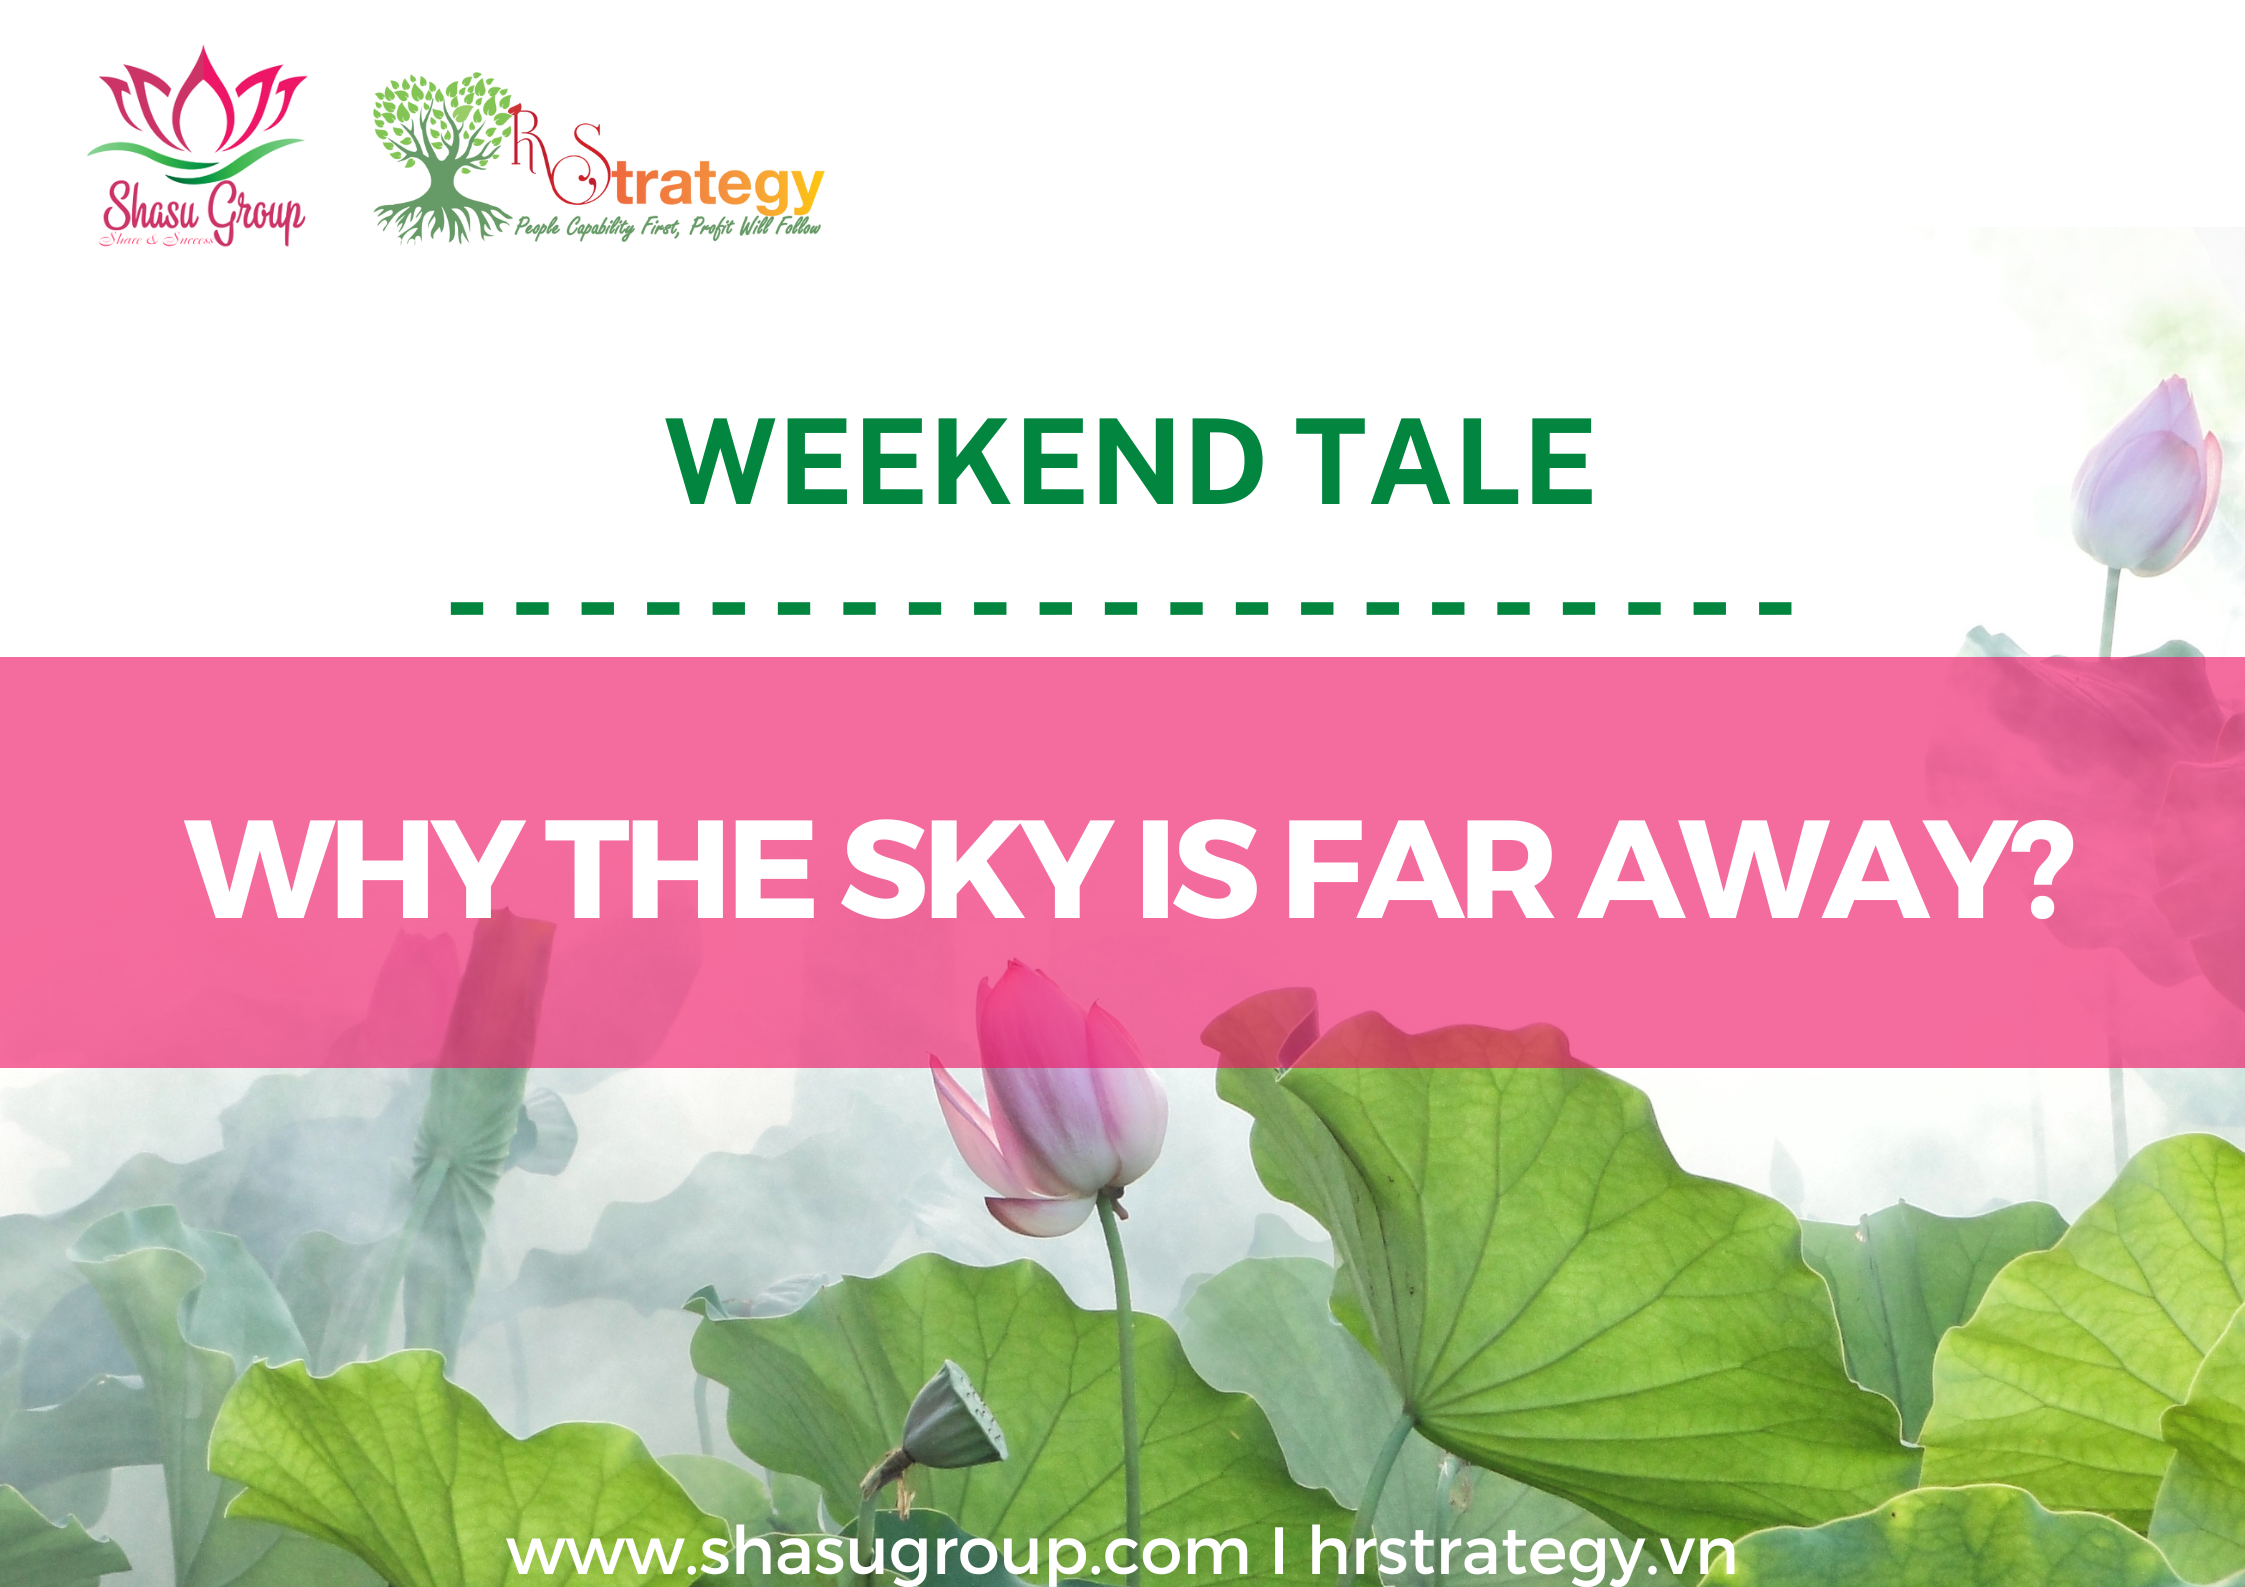 WEEKEND TALE NO. 1: WHY THE SKY IS FAR AWAY?